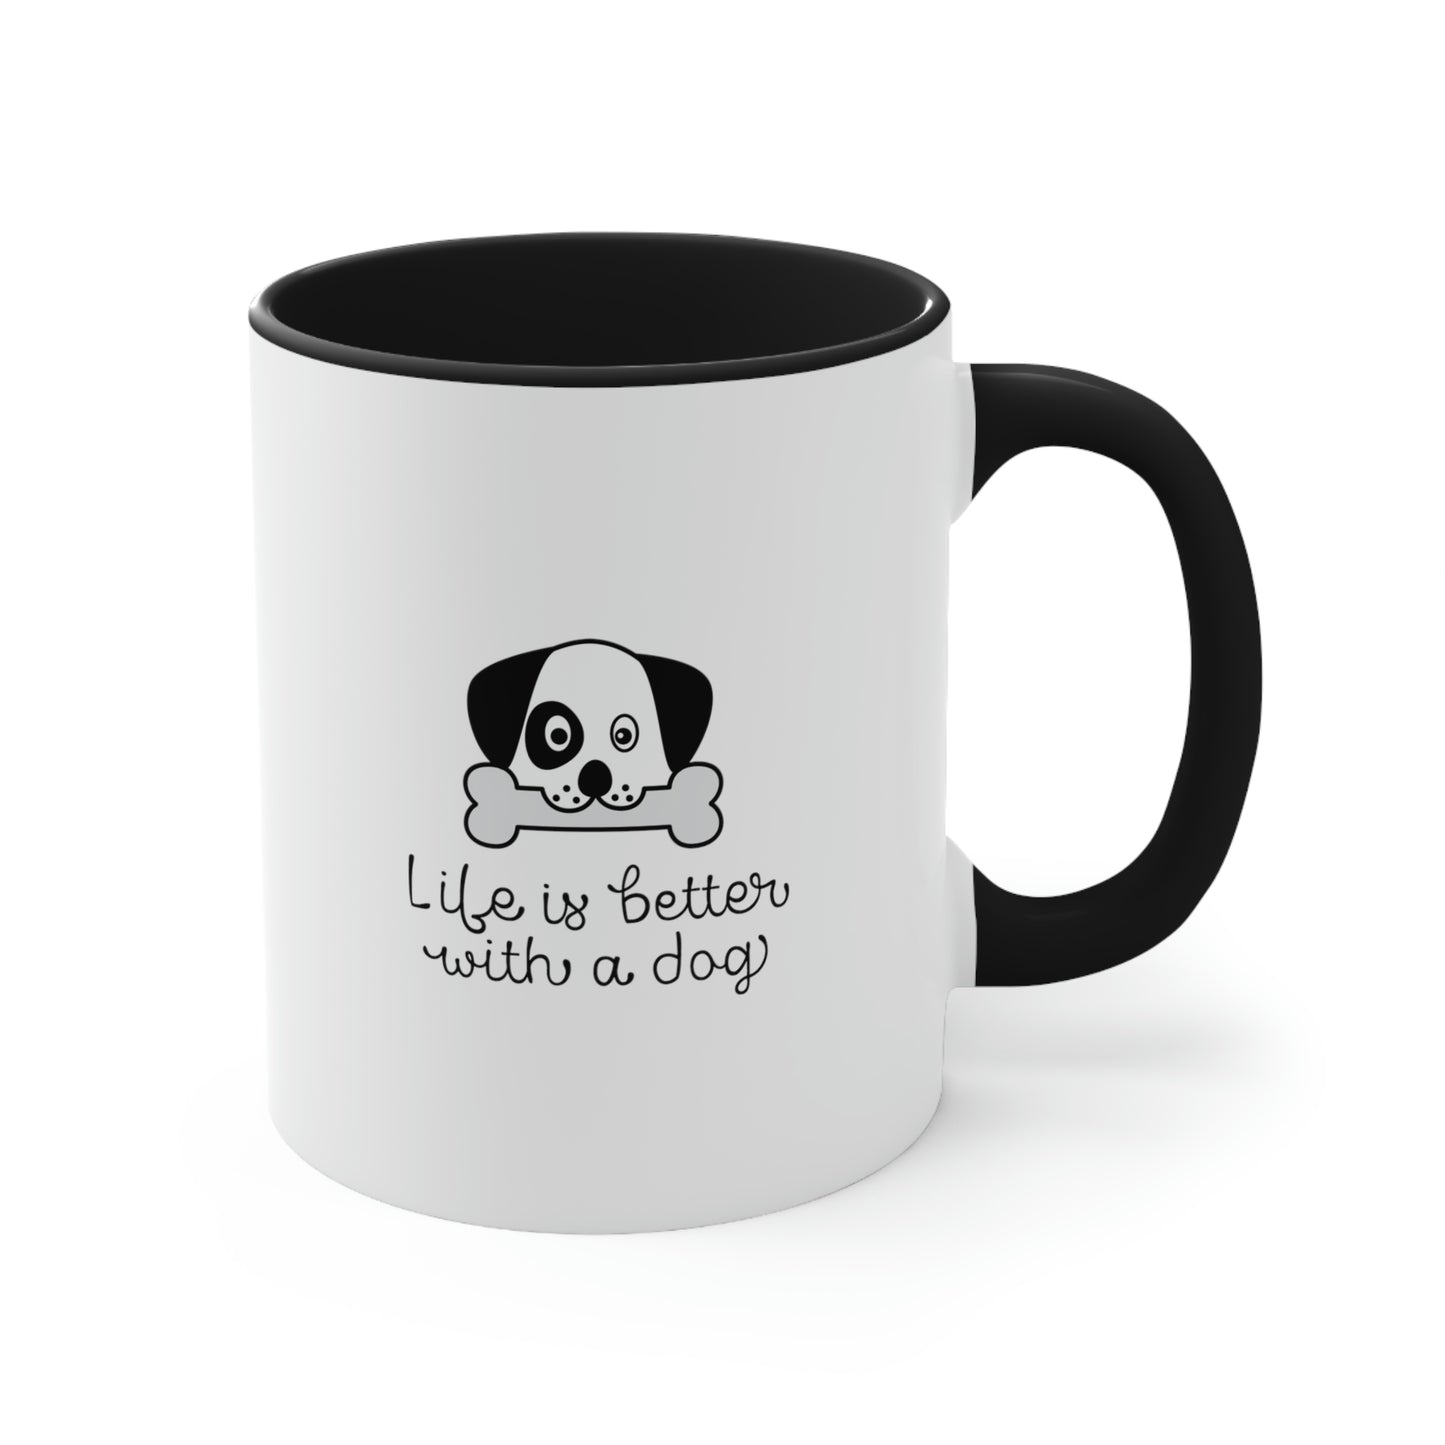 Life is better with a dog Black and White Coffee Mug, 11oz